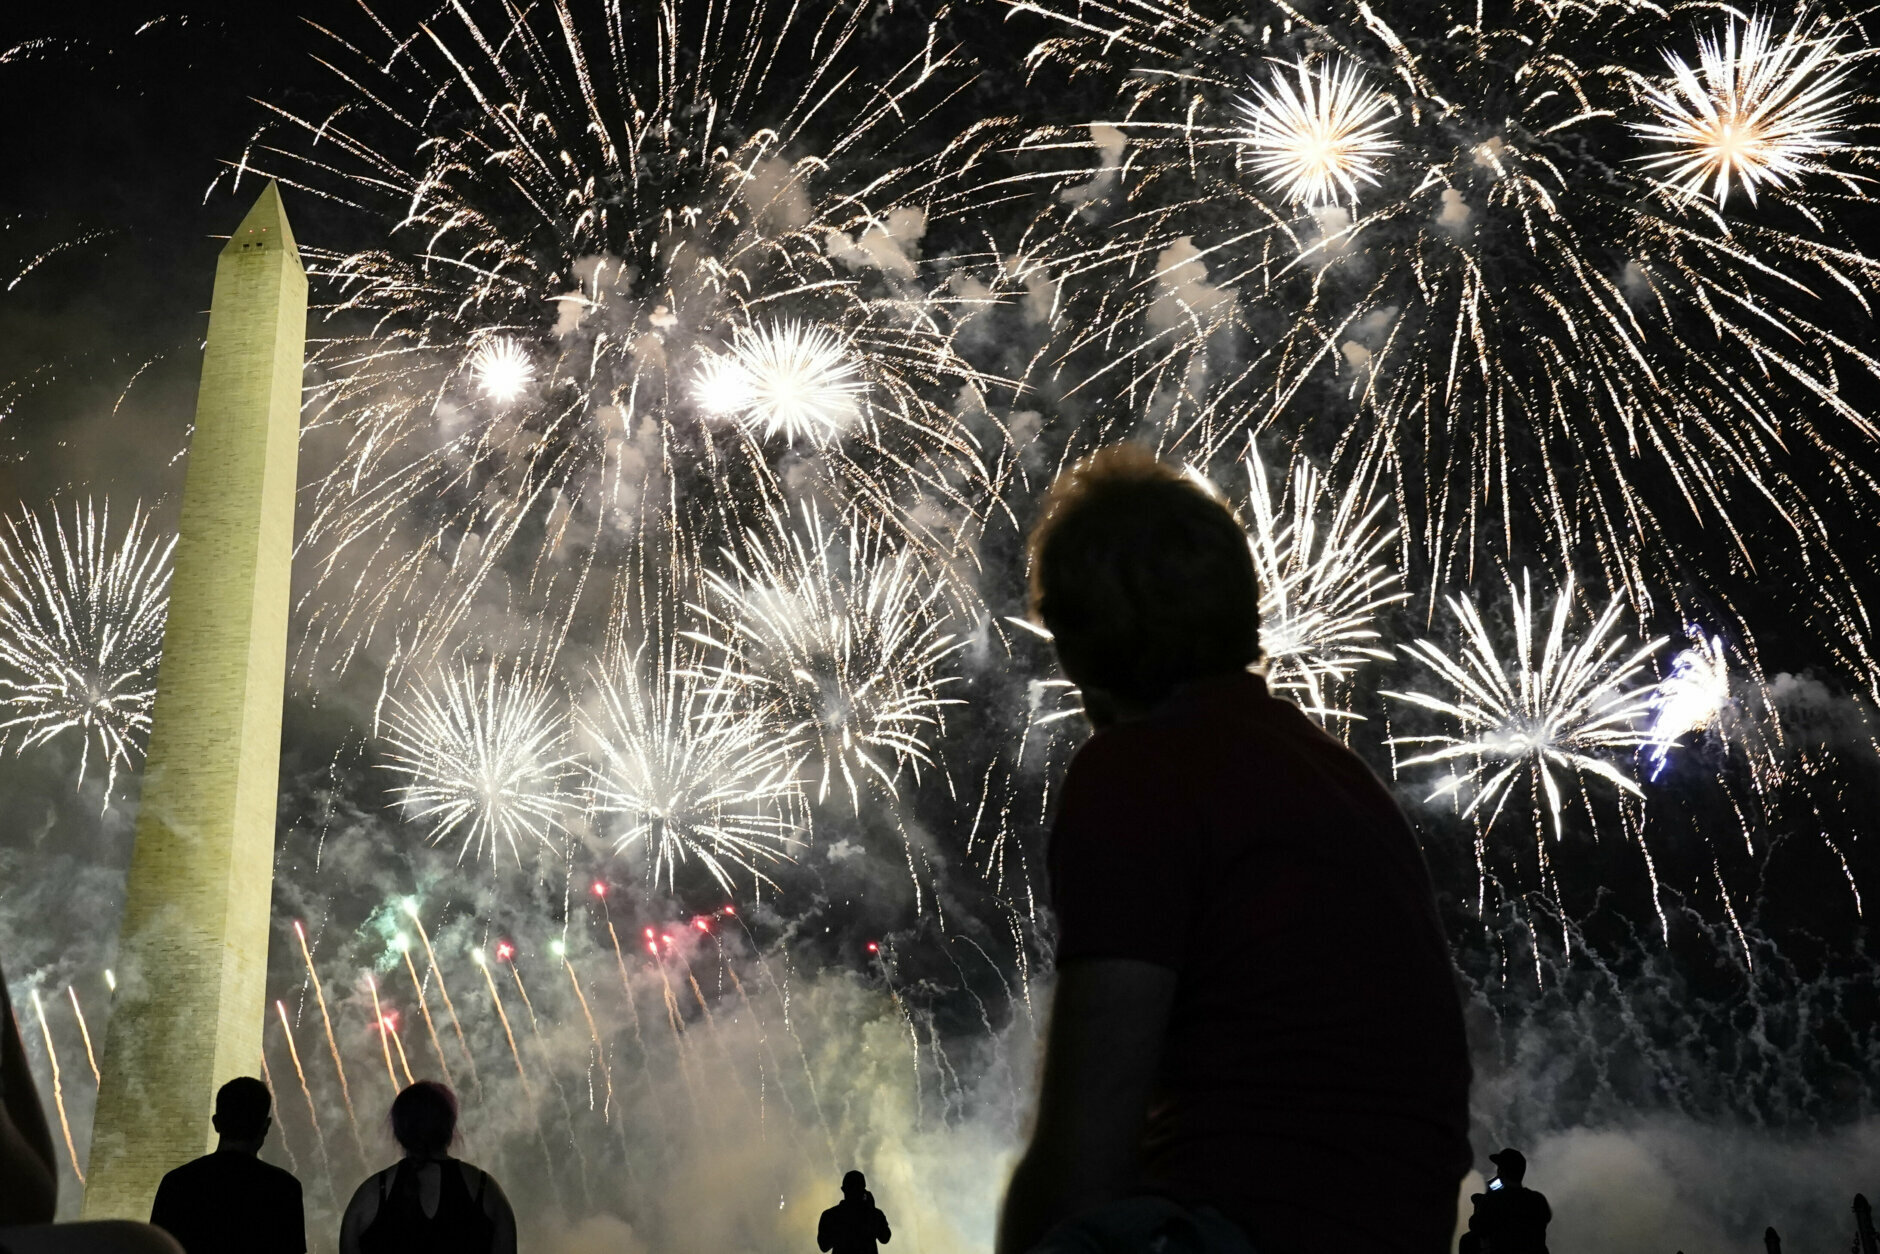 People watch fireworks near the Washington Monument on the fourth day of the Republican National Convention, Thursday, Aug. 27, 2020, in Washington. (AP Photo/Andrew Harnik)